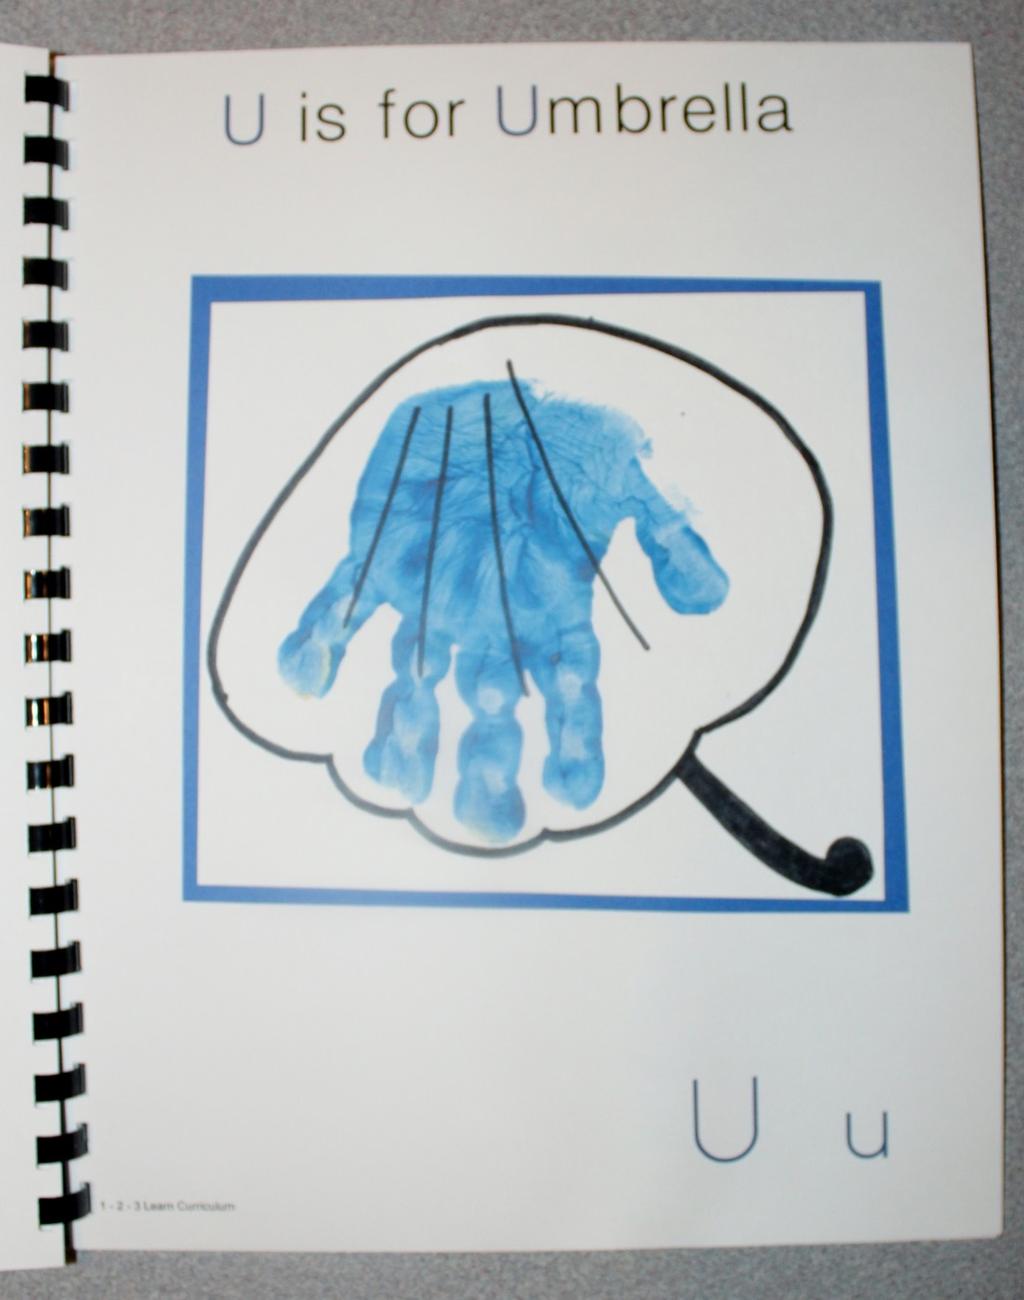 U is for Umbrella Paint the child s hand blue and place on white card stock. When dry, trim and attach to blue card stock.